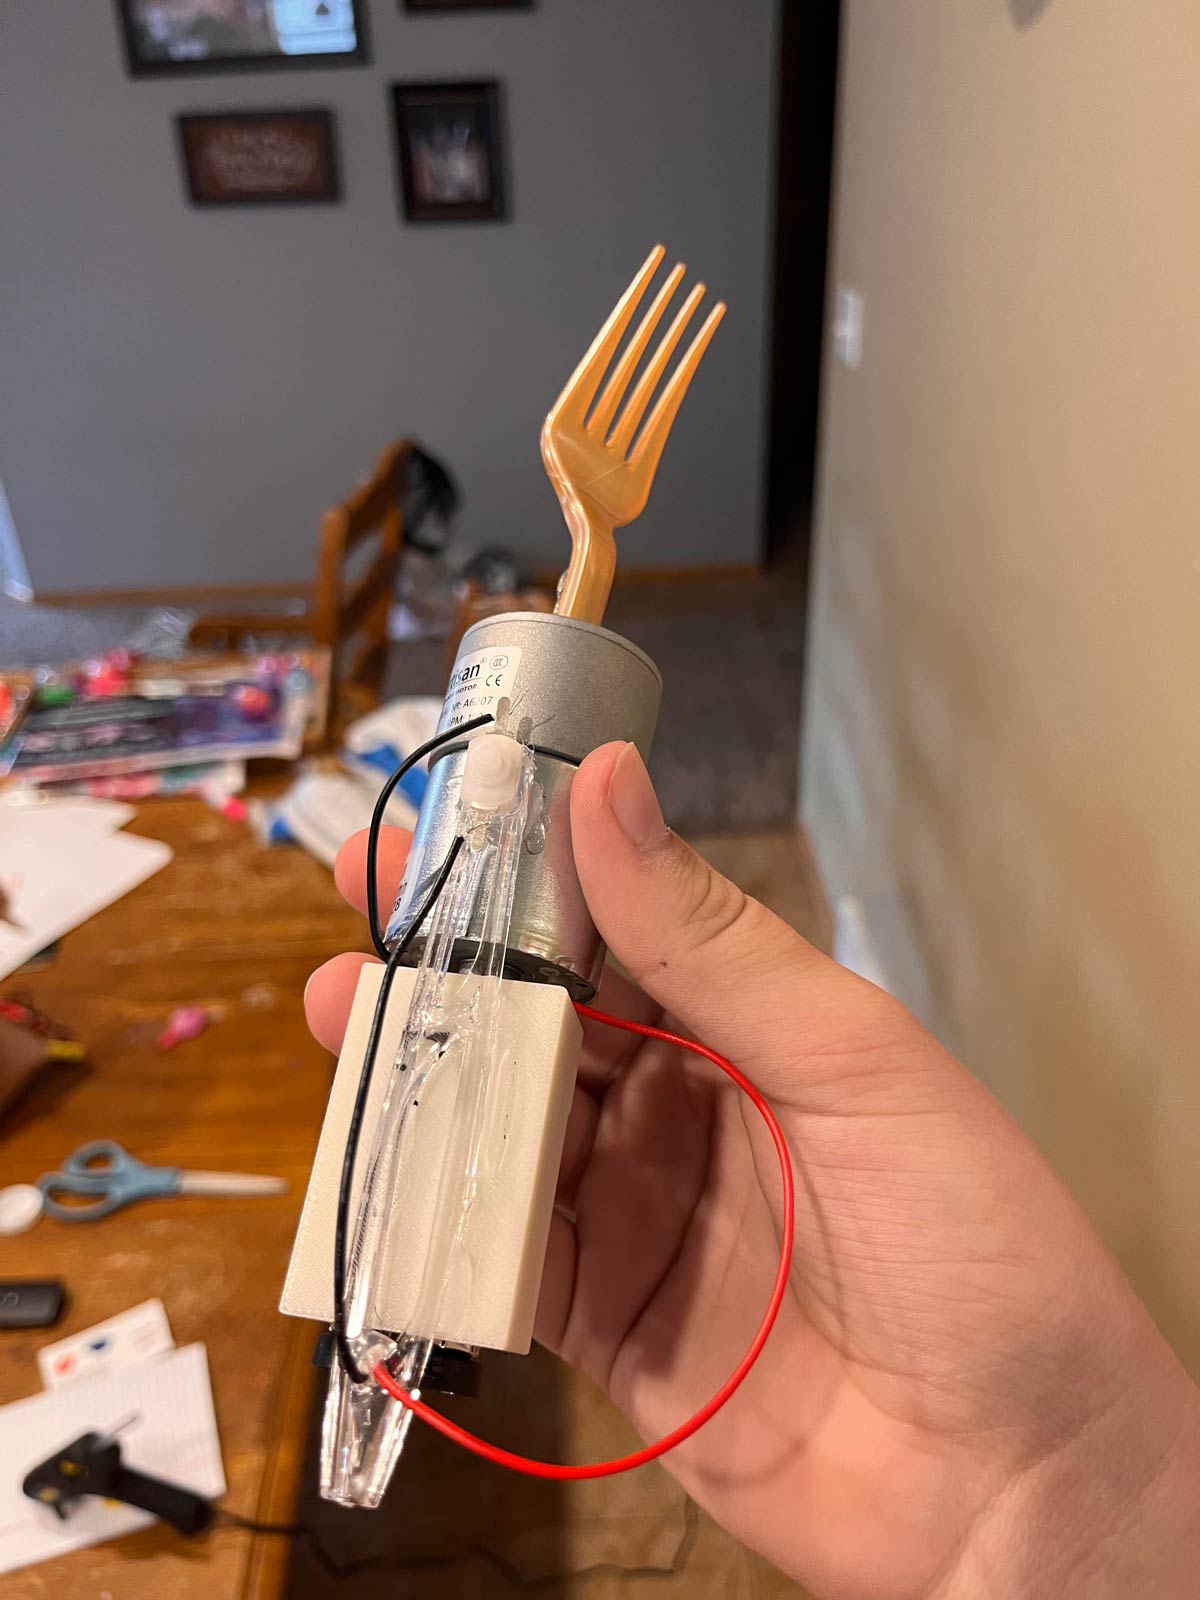 Made a spaghetti spinning fork for a class